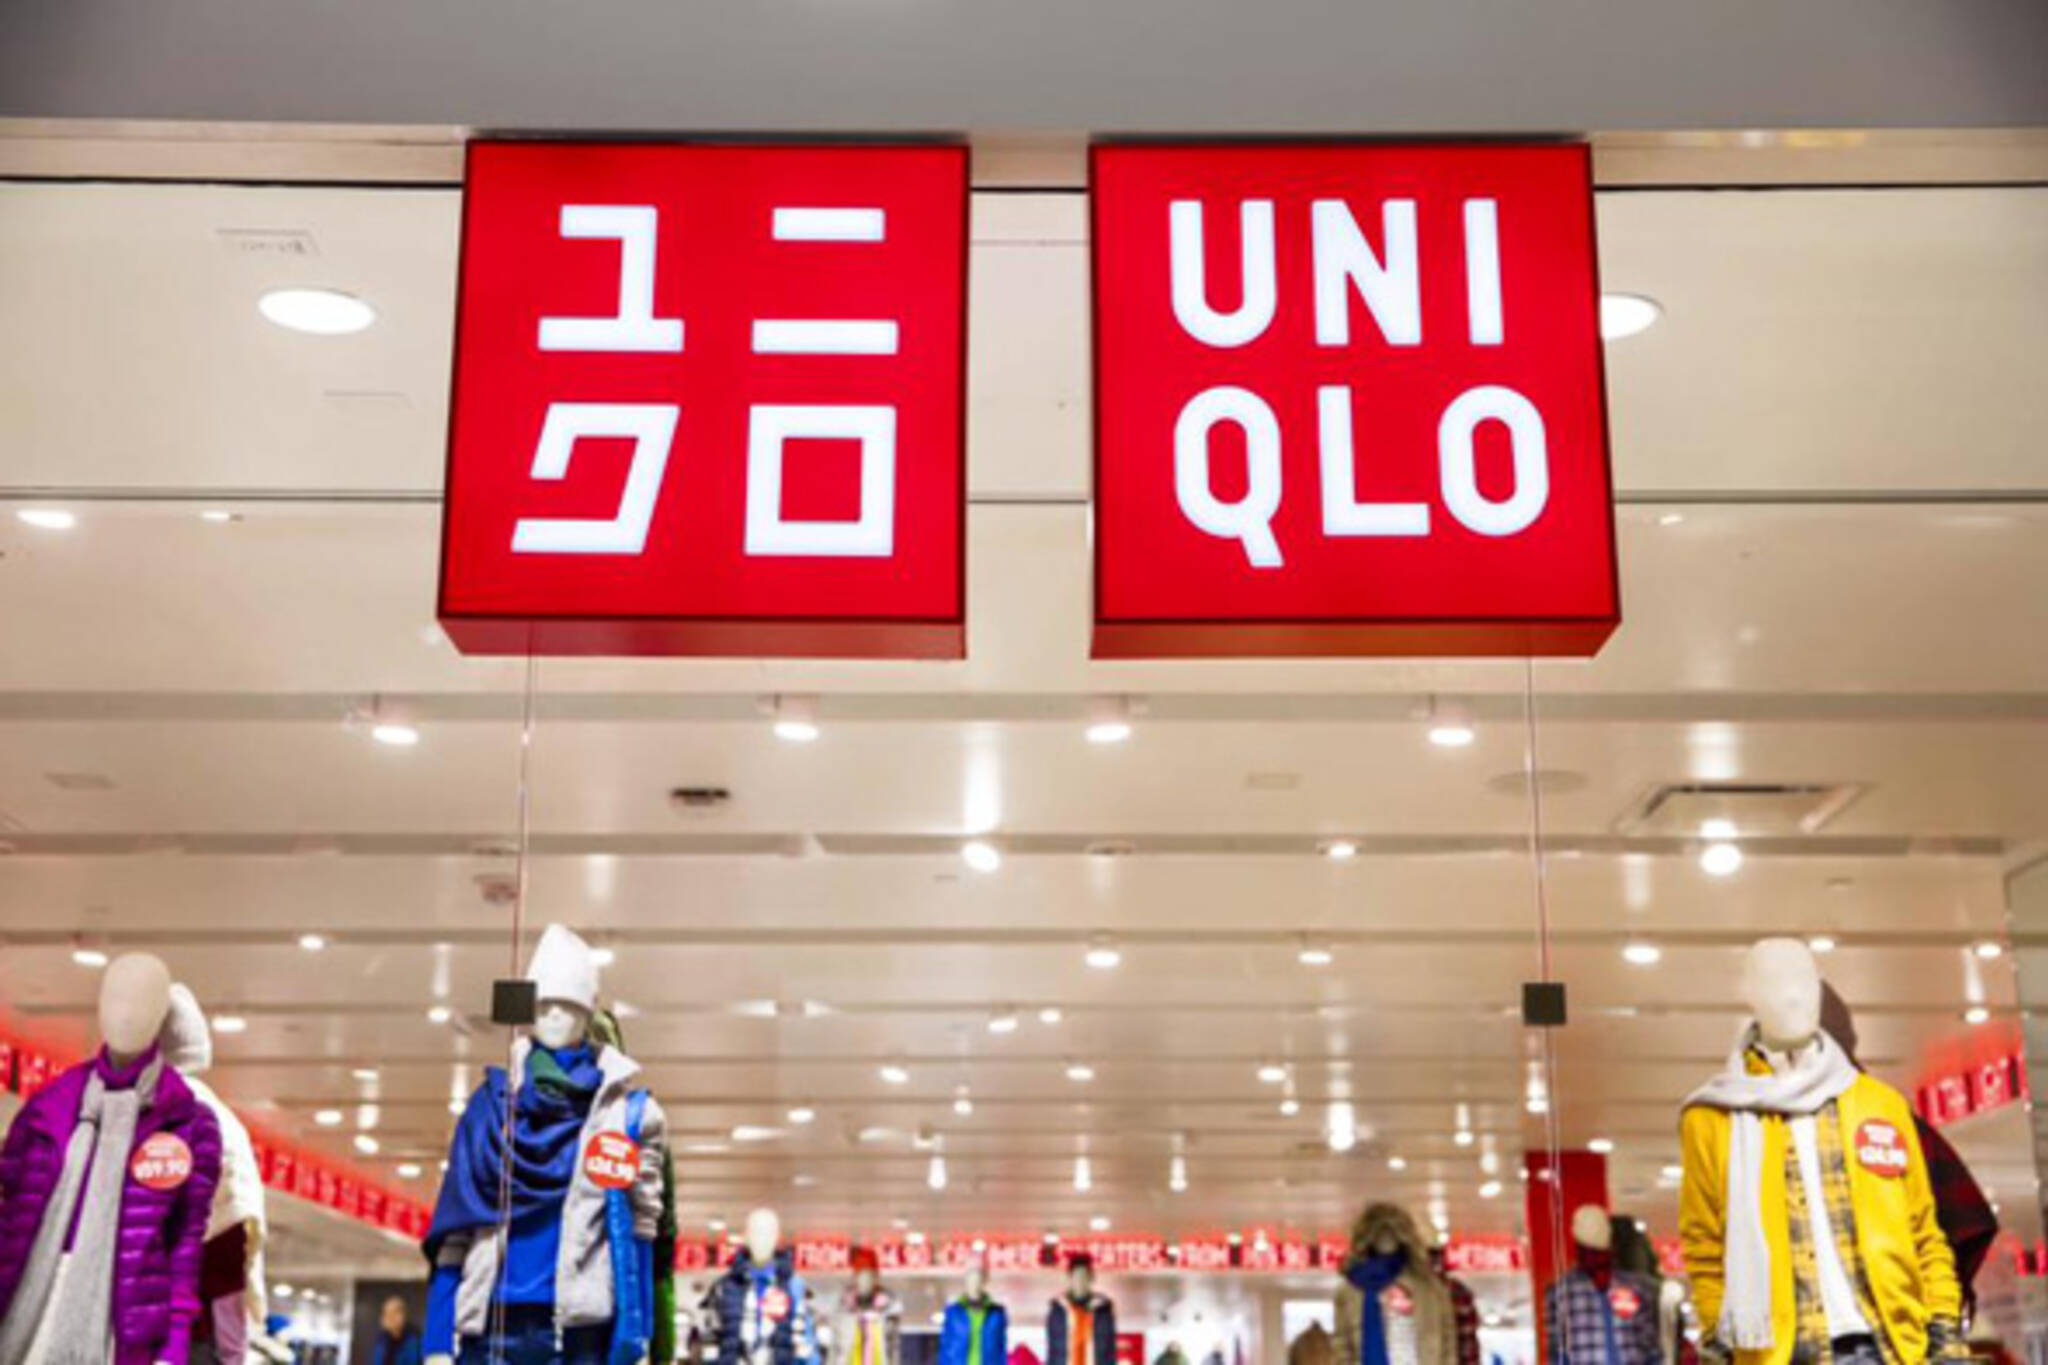 Uniqlo will open its first Toronto store this October